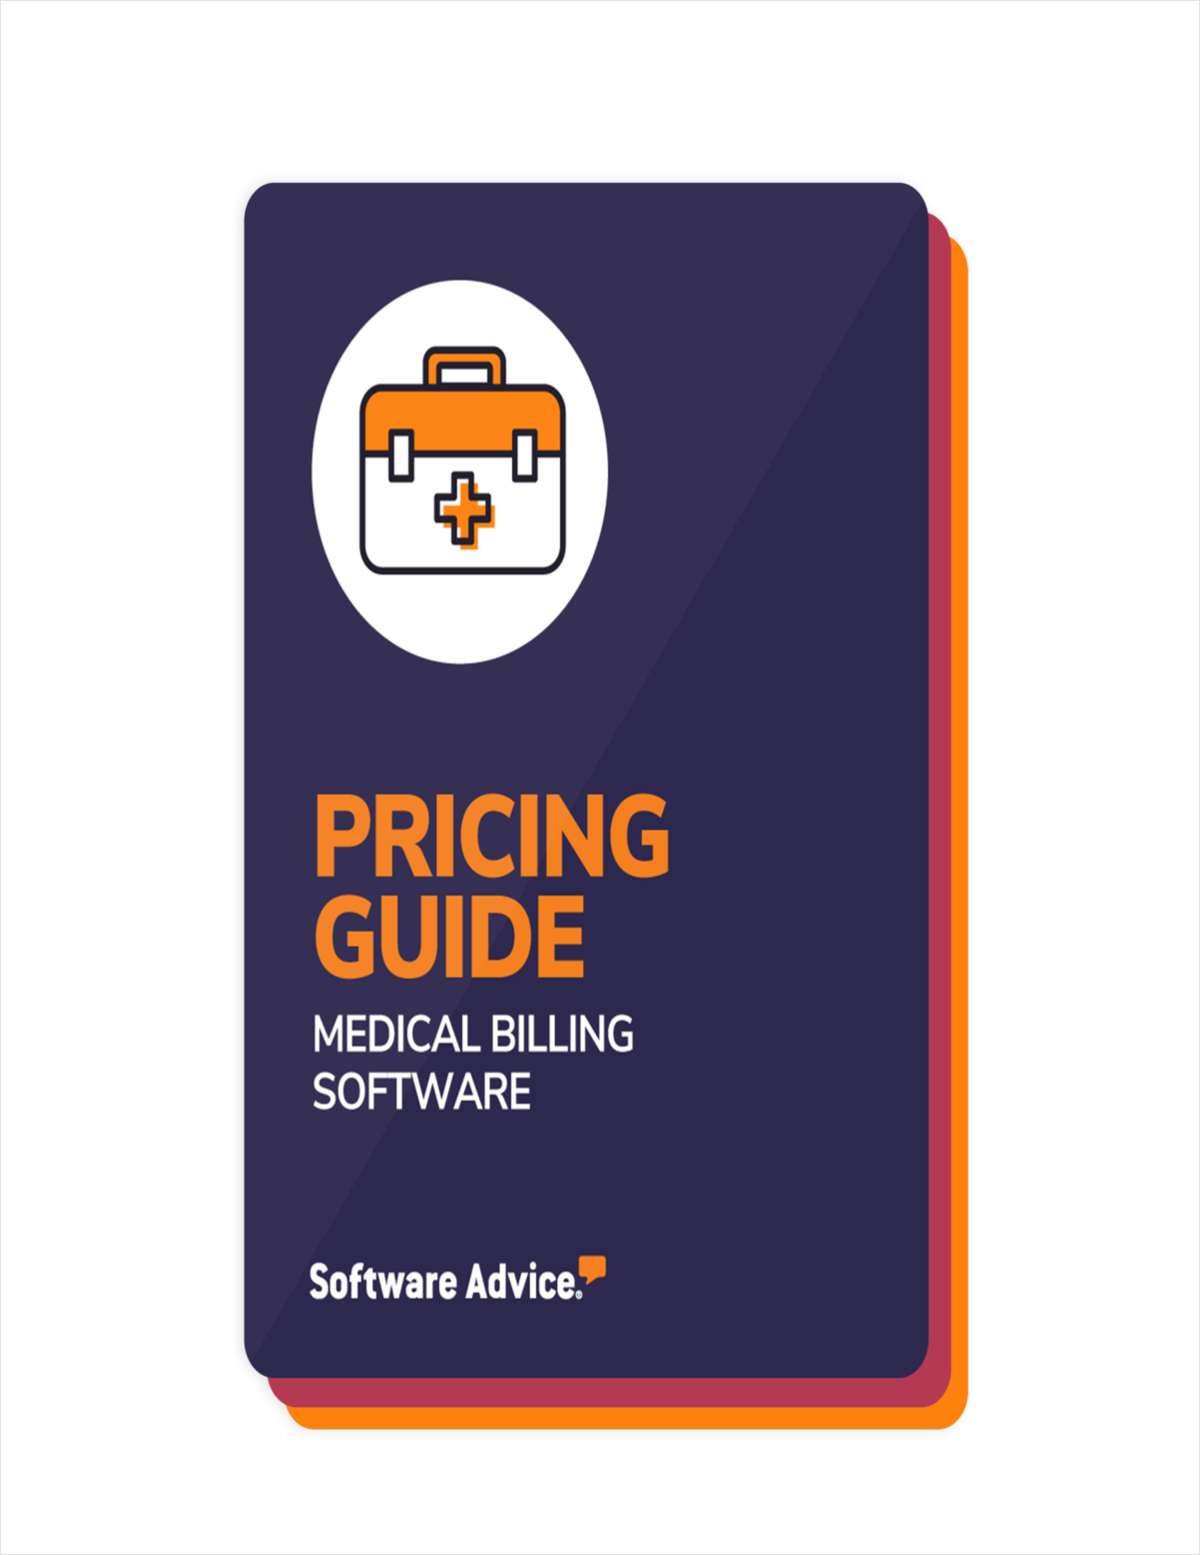 How Much Does Medical Billing Software Cost in 2021? Hidden Costs & Breakdown